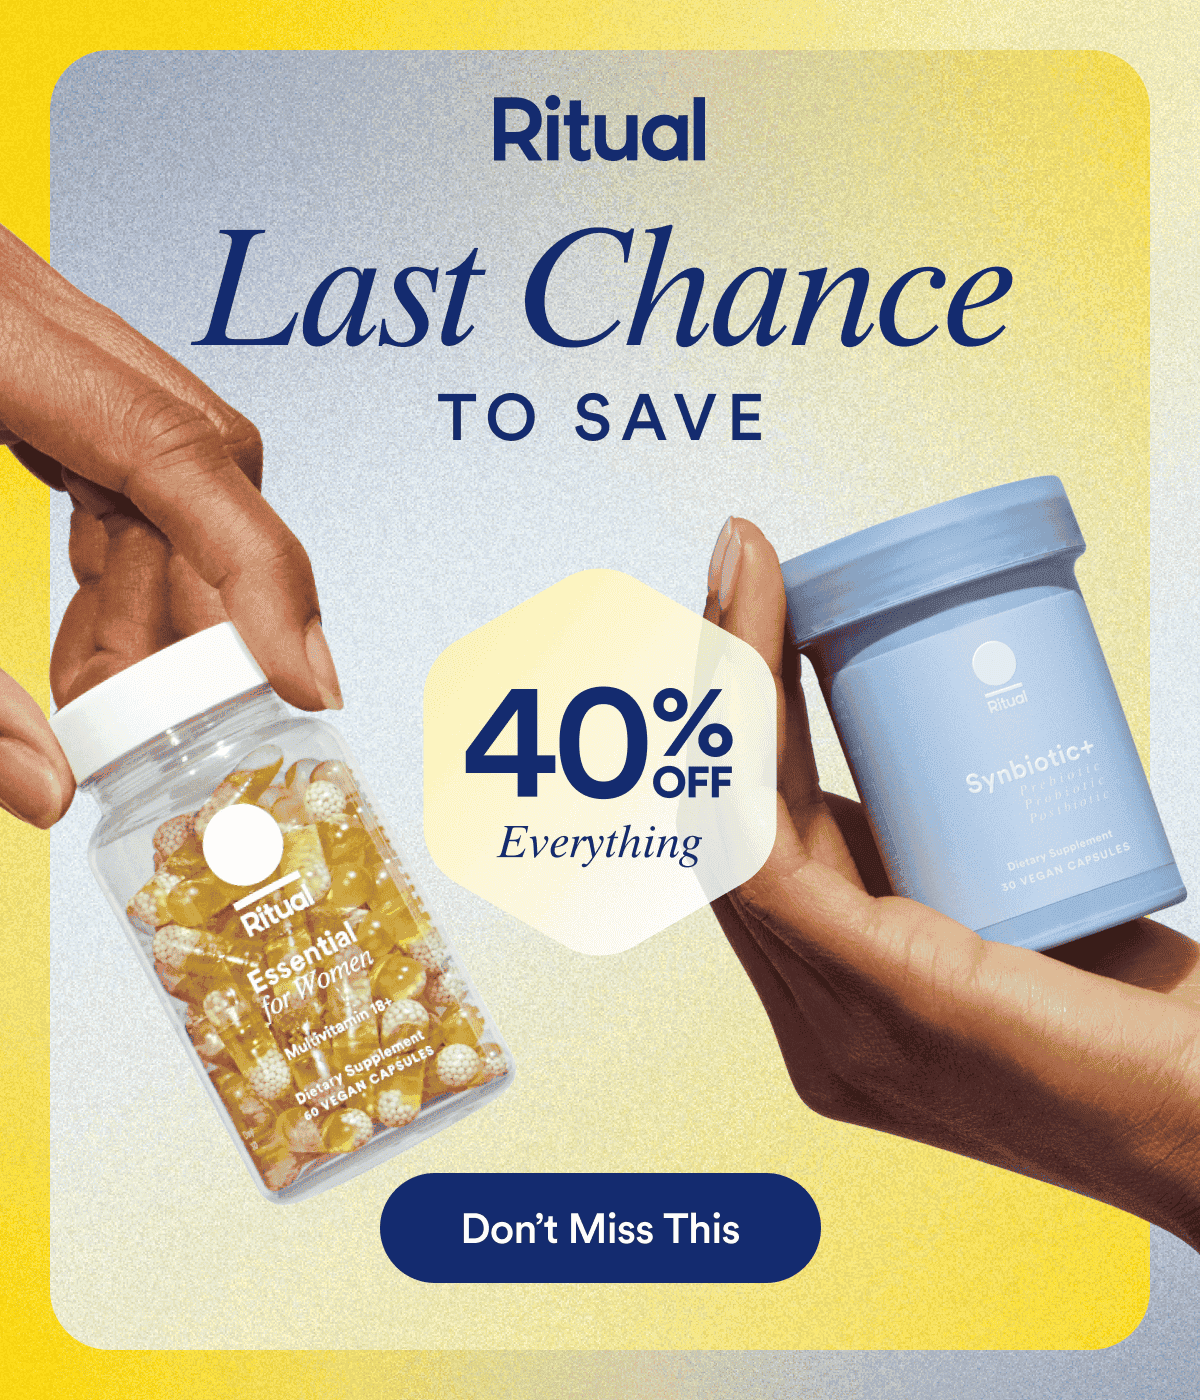 Ritual | Last Chance TO SAVE 40% OFF Everything | Don't Miss This